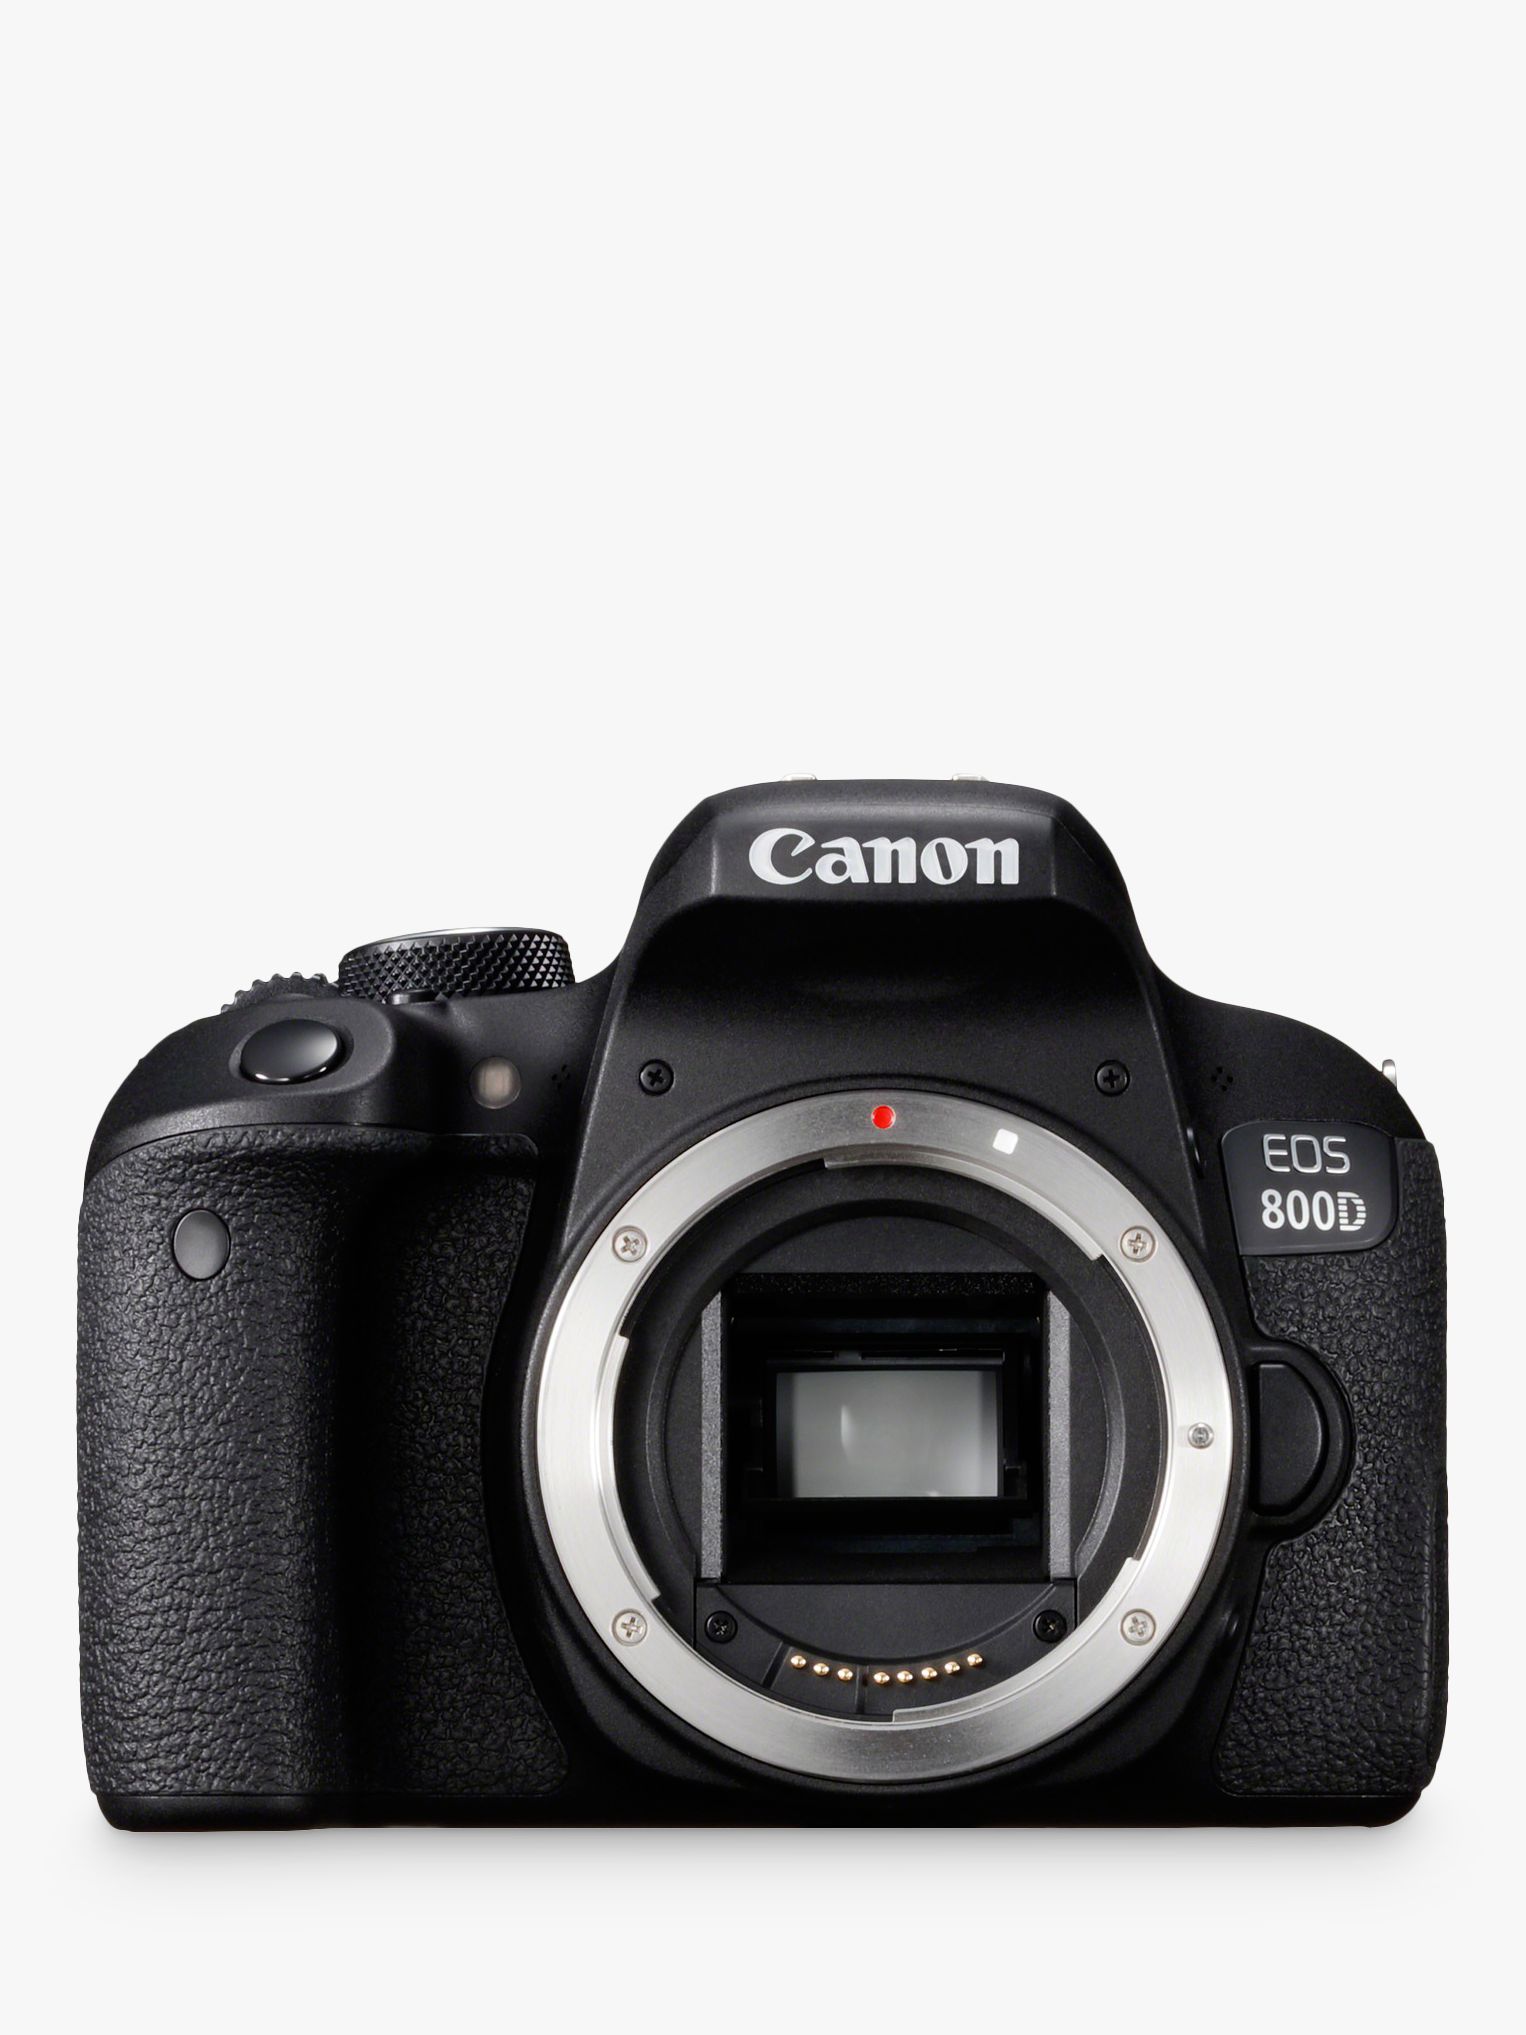 Canon EOS 800D Digital SLR Camera, HD 1080p, 24.2MP, Wi-Fi, Bluetooth, NFC, Optical Viewfinder, 3 Vari-Angle Touch Screen, Body Only